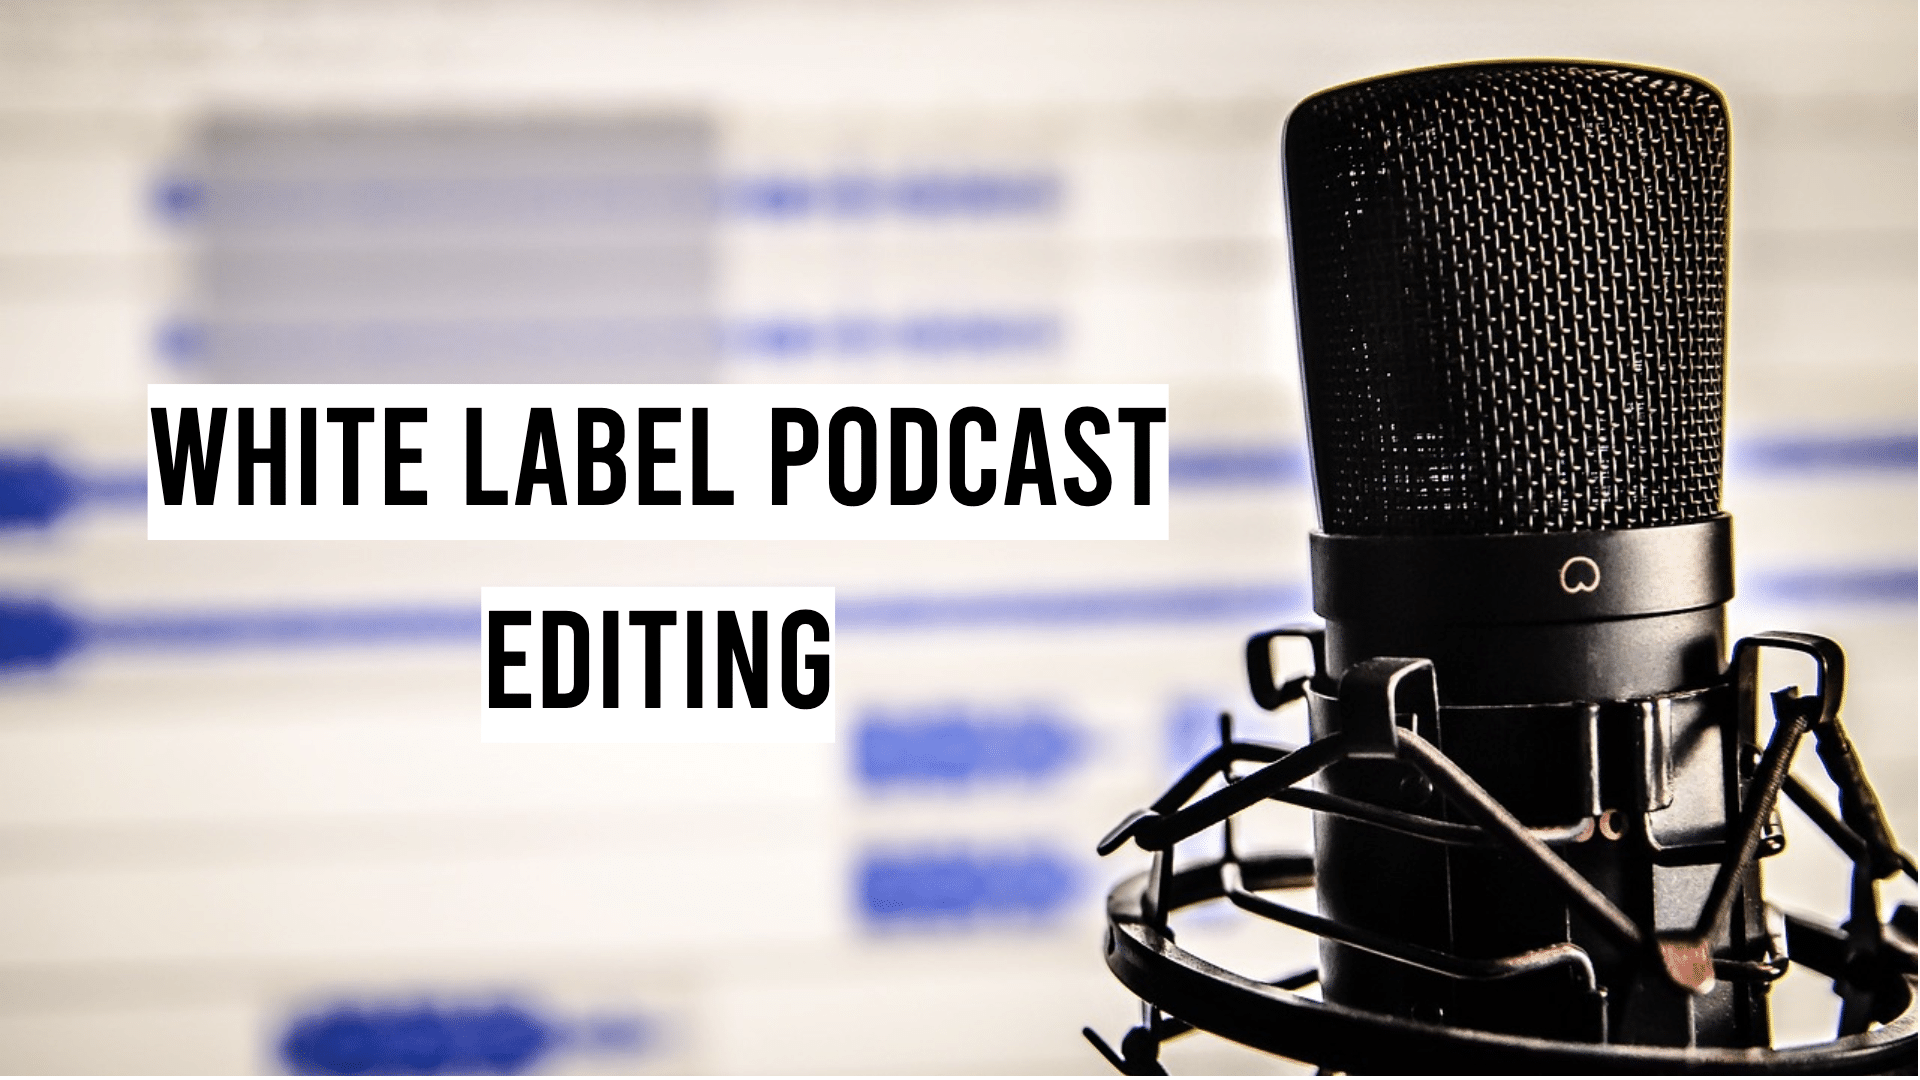 White Label Podcast Editing